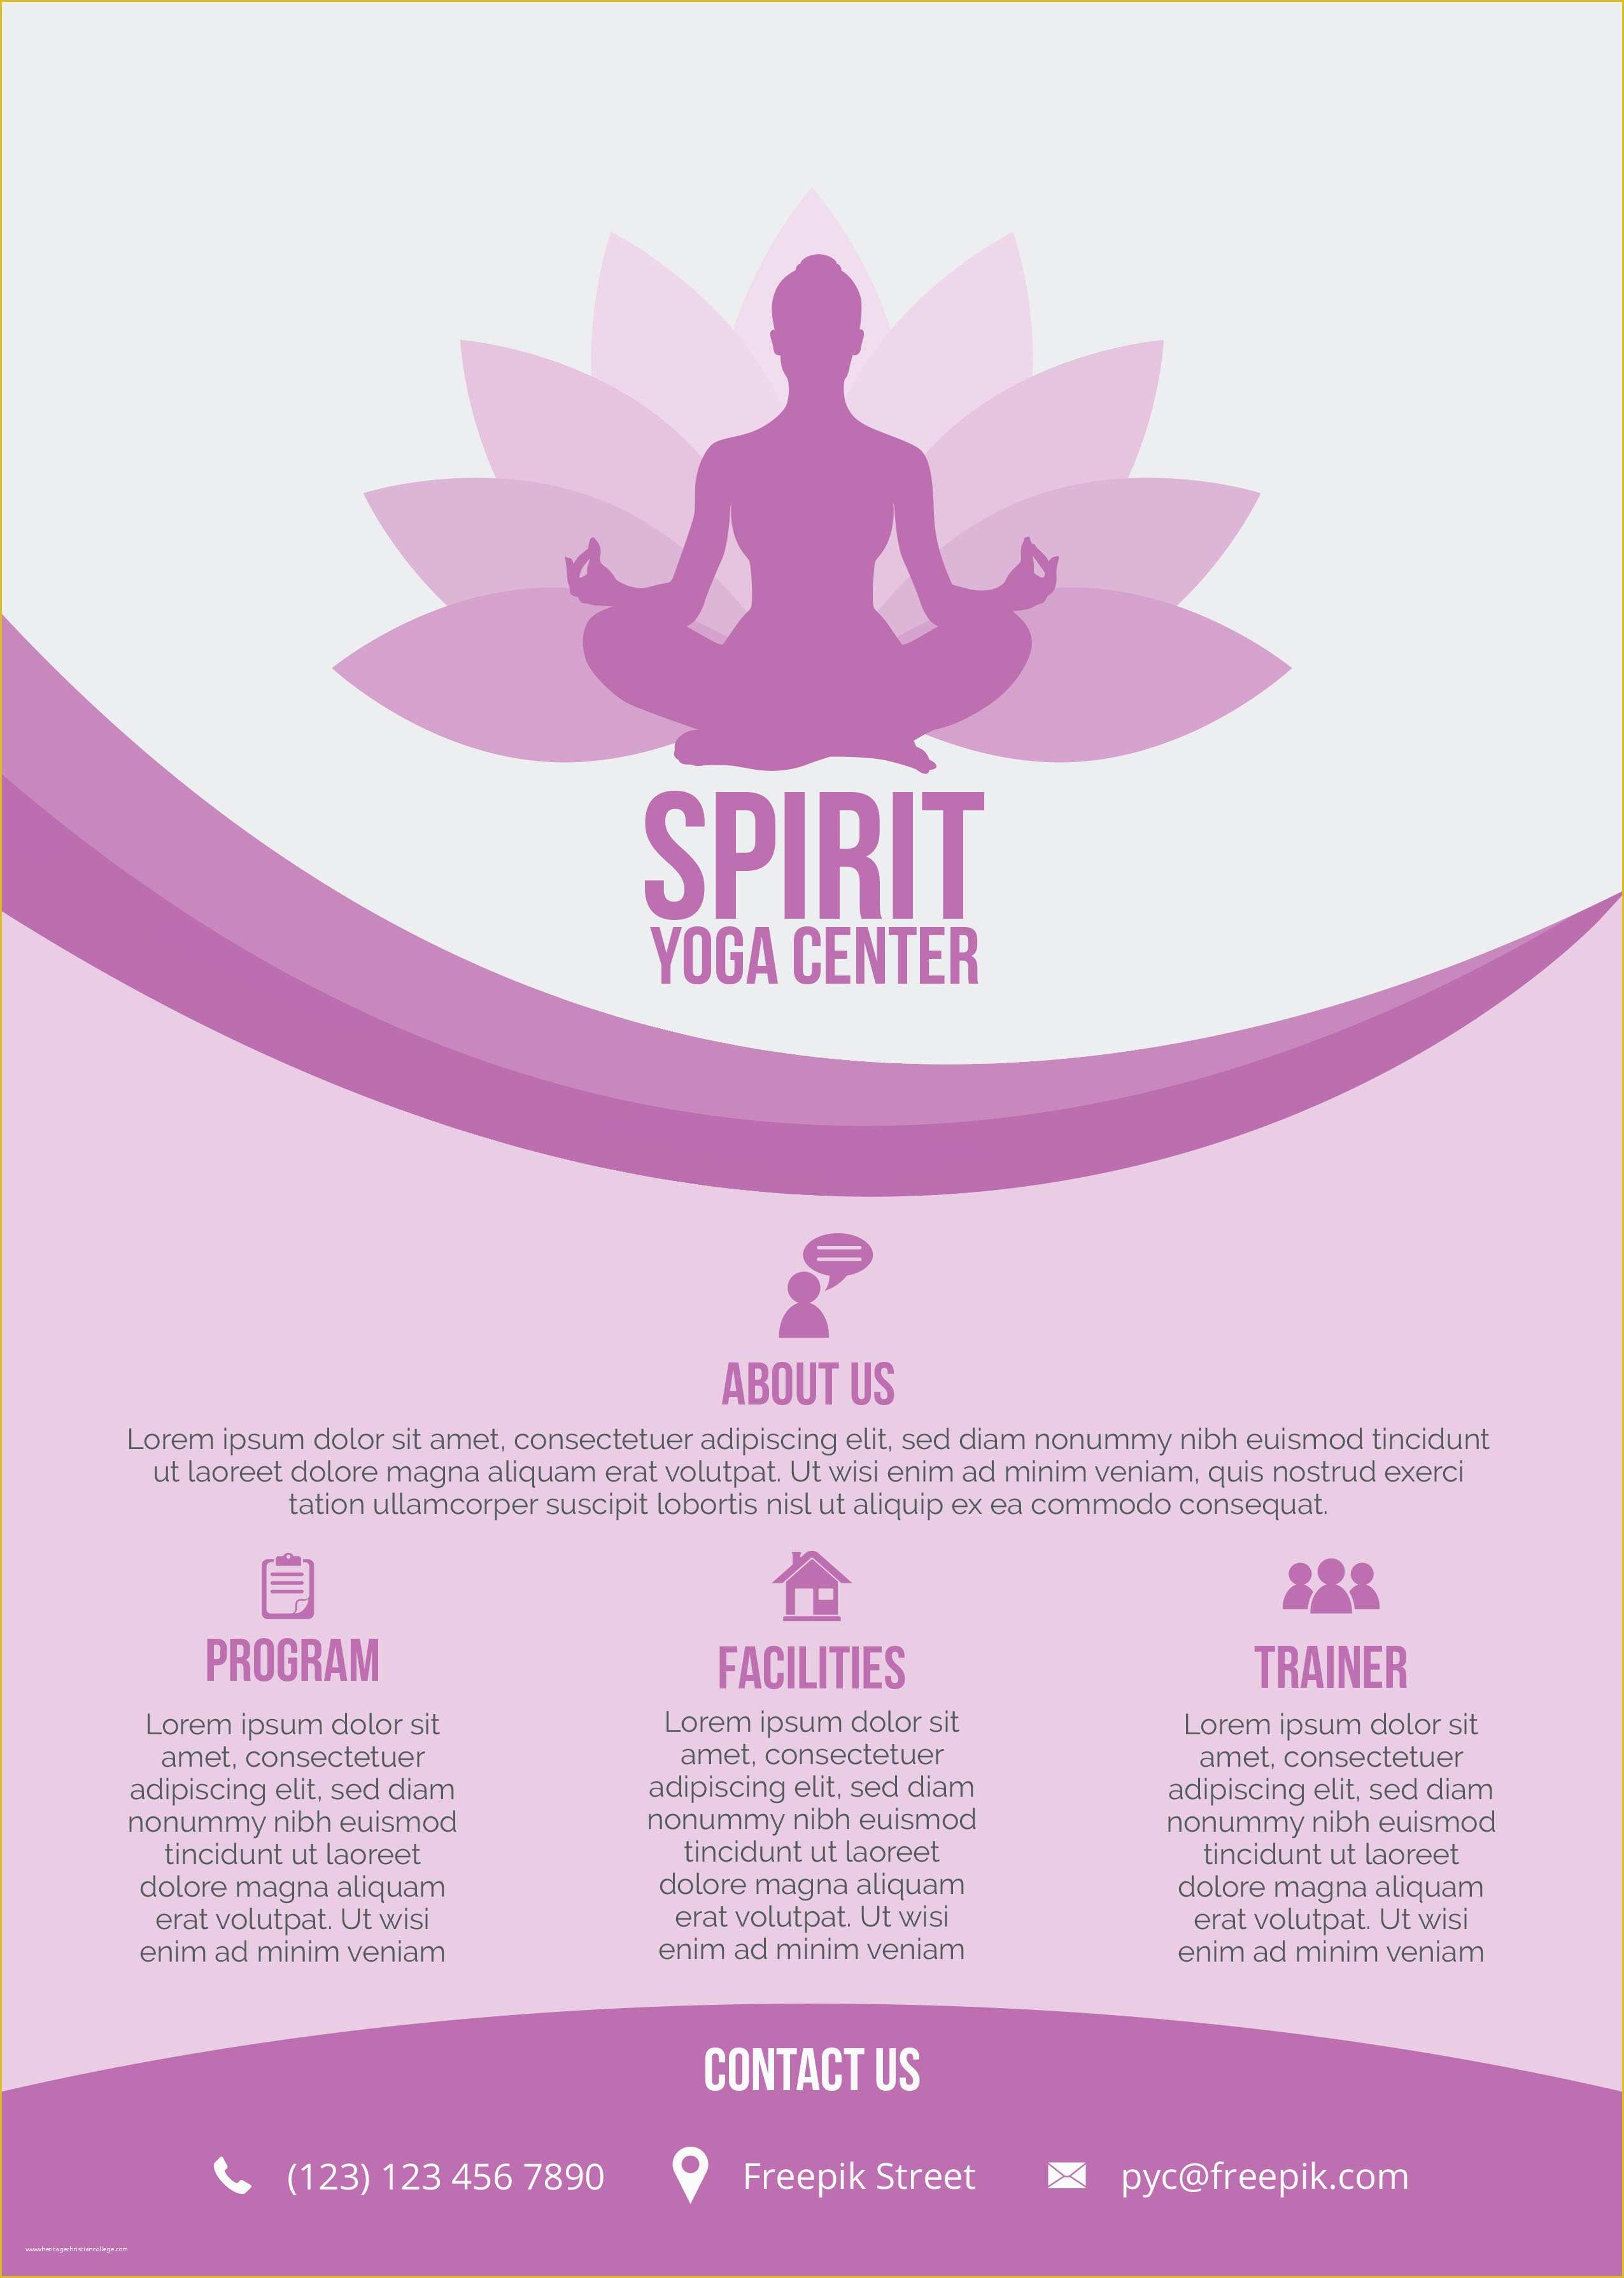 Free Printable Flyer Templates Of 20 Distinctive Yoga Flyer Templates Free for Professionals